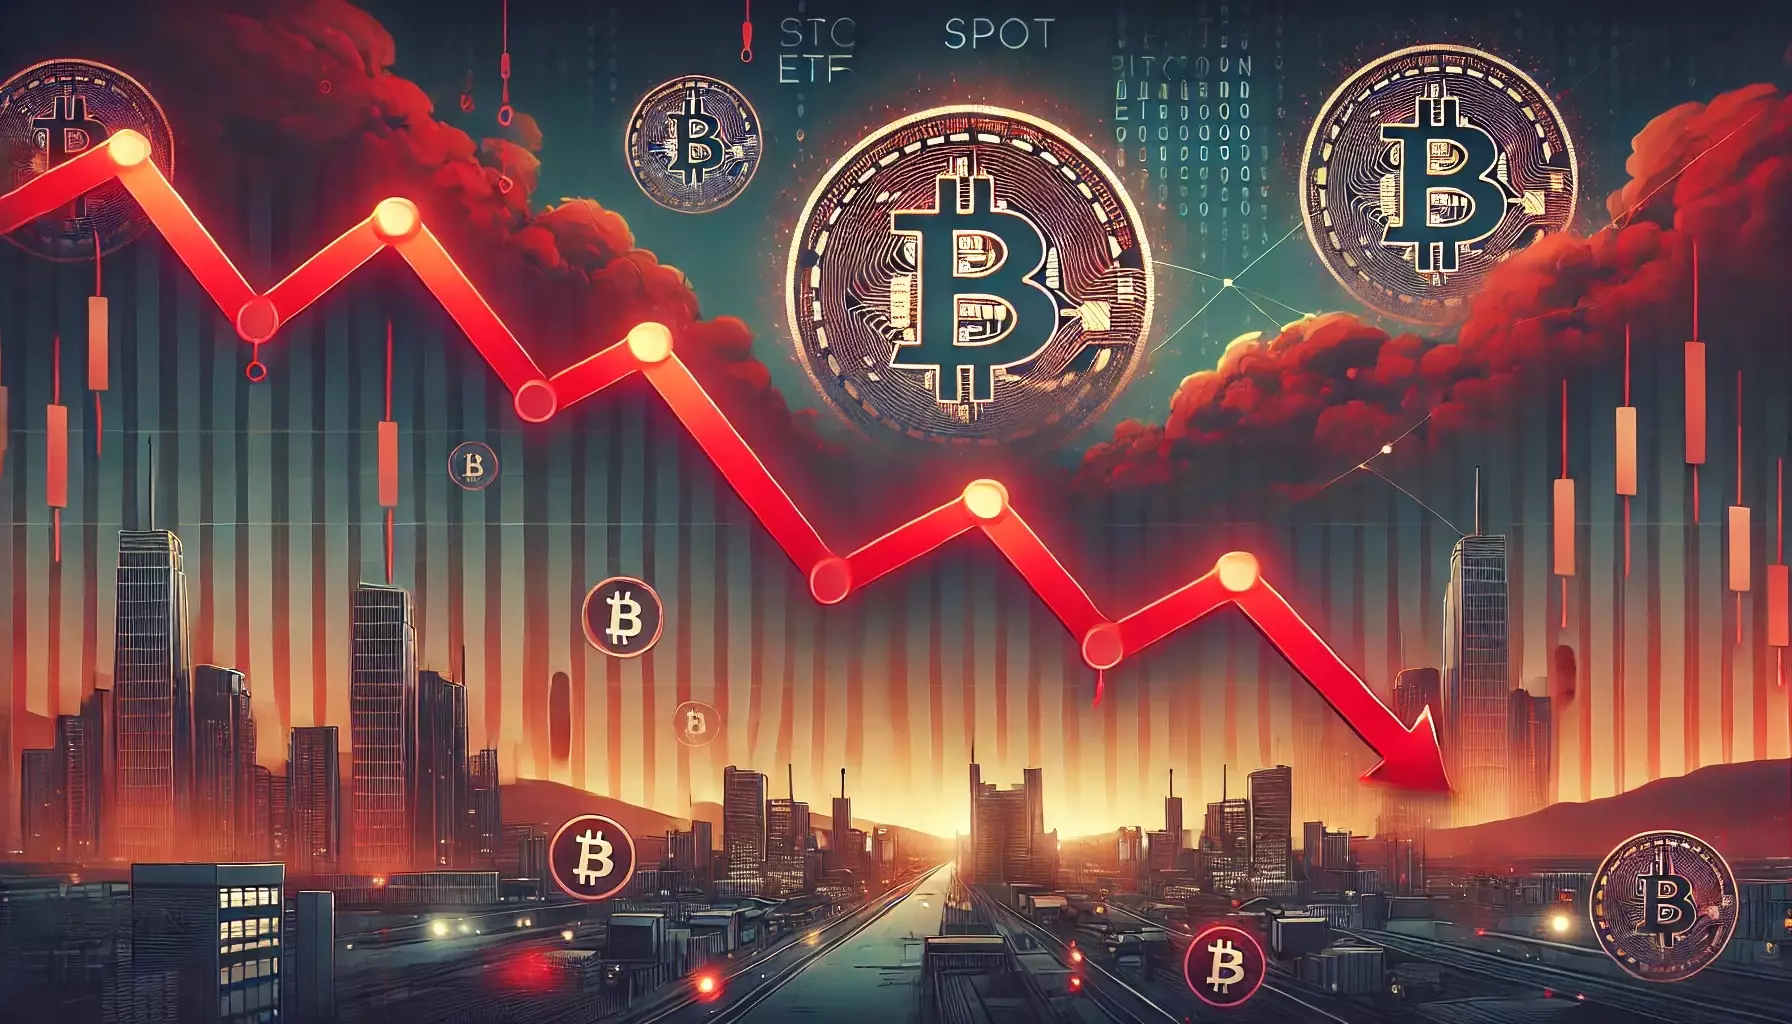 Spot Bitcoin ETF Outflows Continue Amid Price Decline